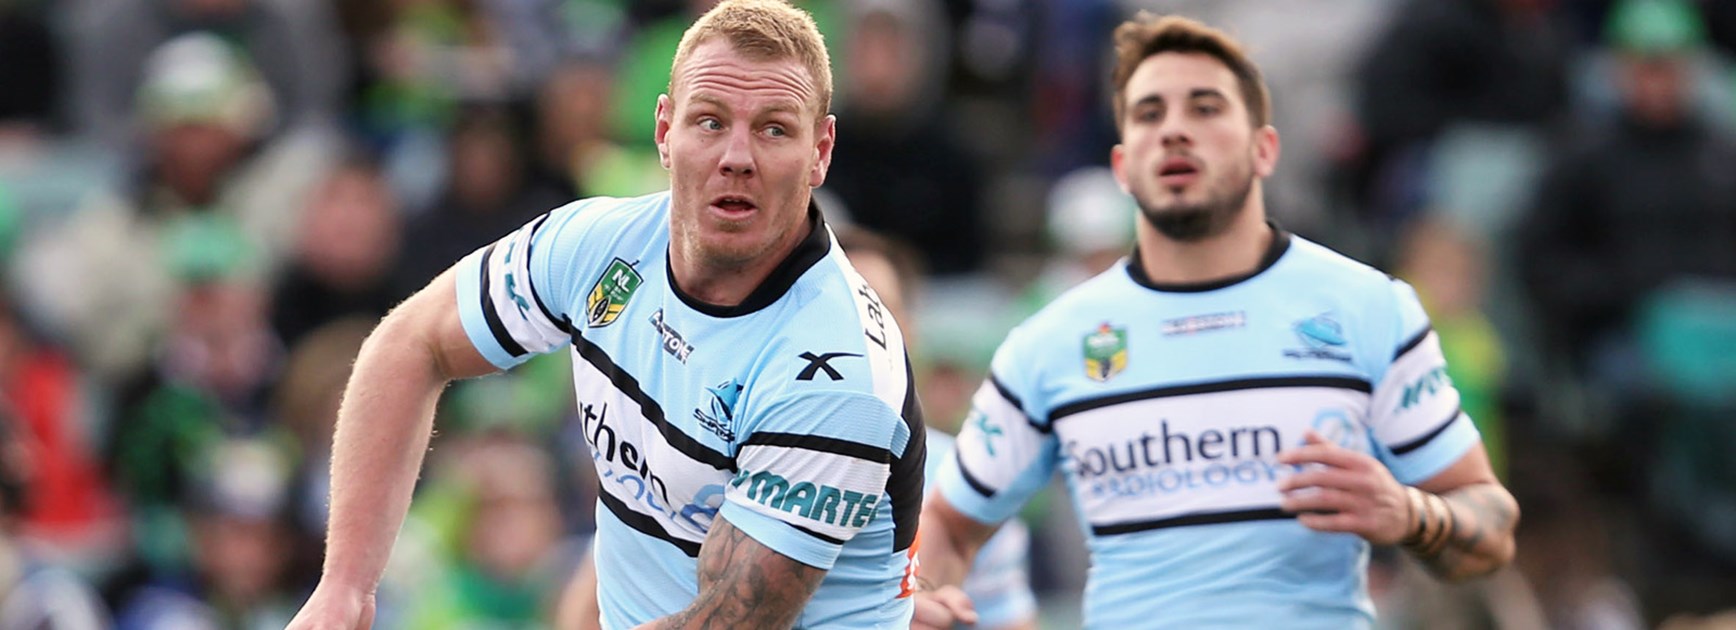 Sharks forward Luke Lewis last tasted victory against the Storm in 2005.